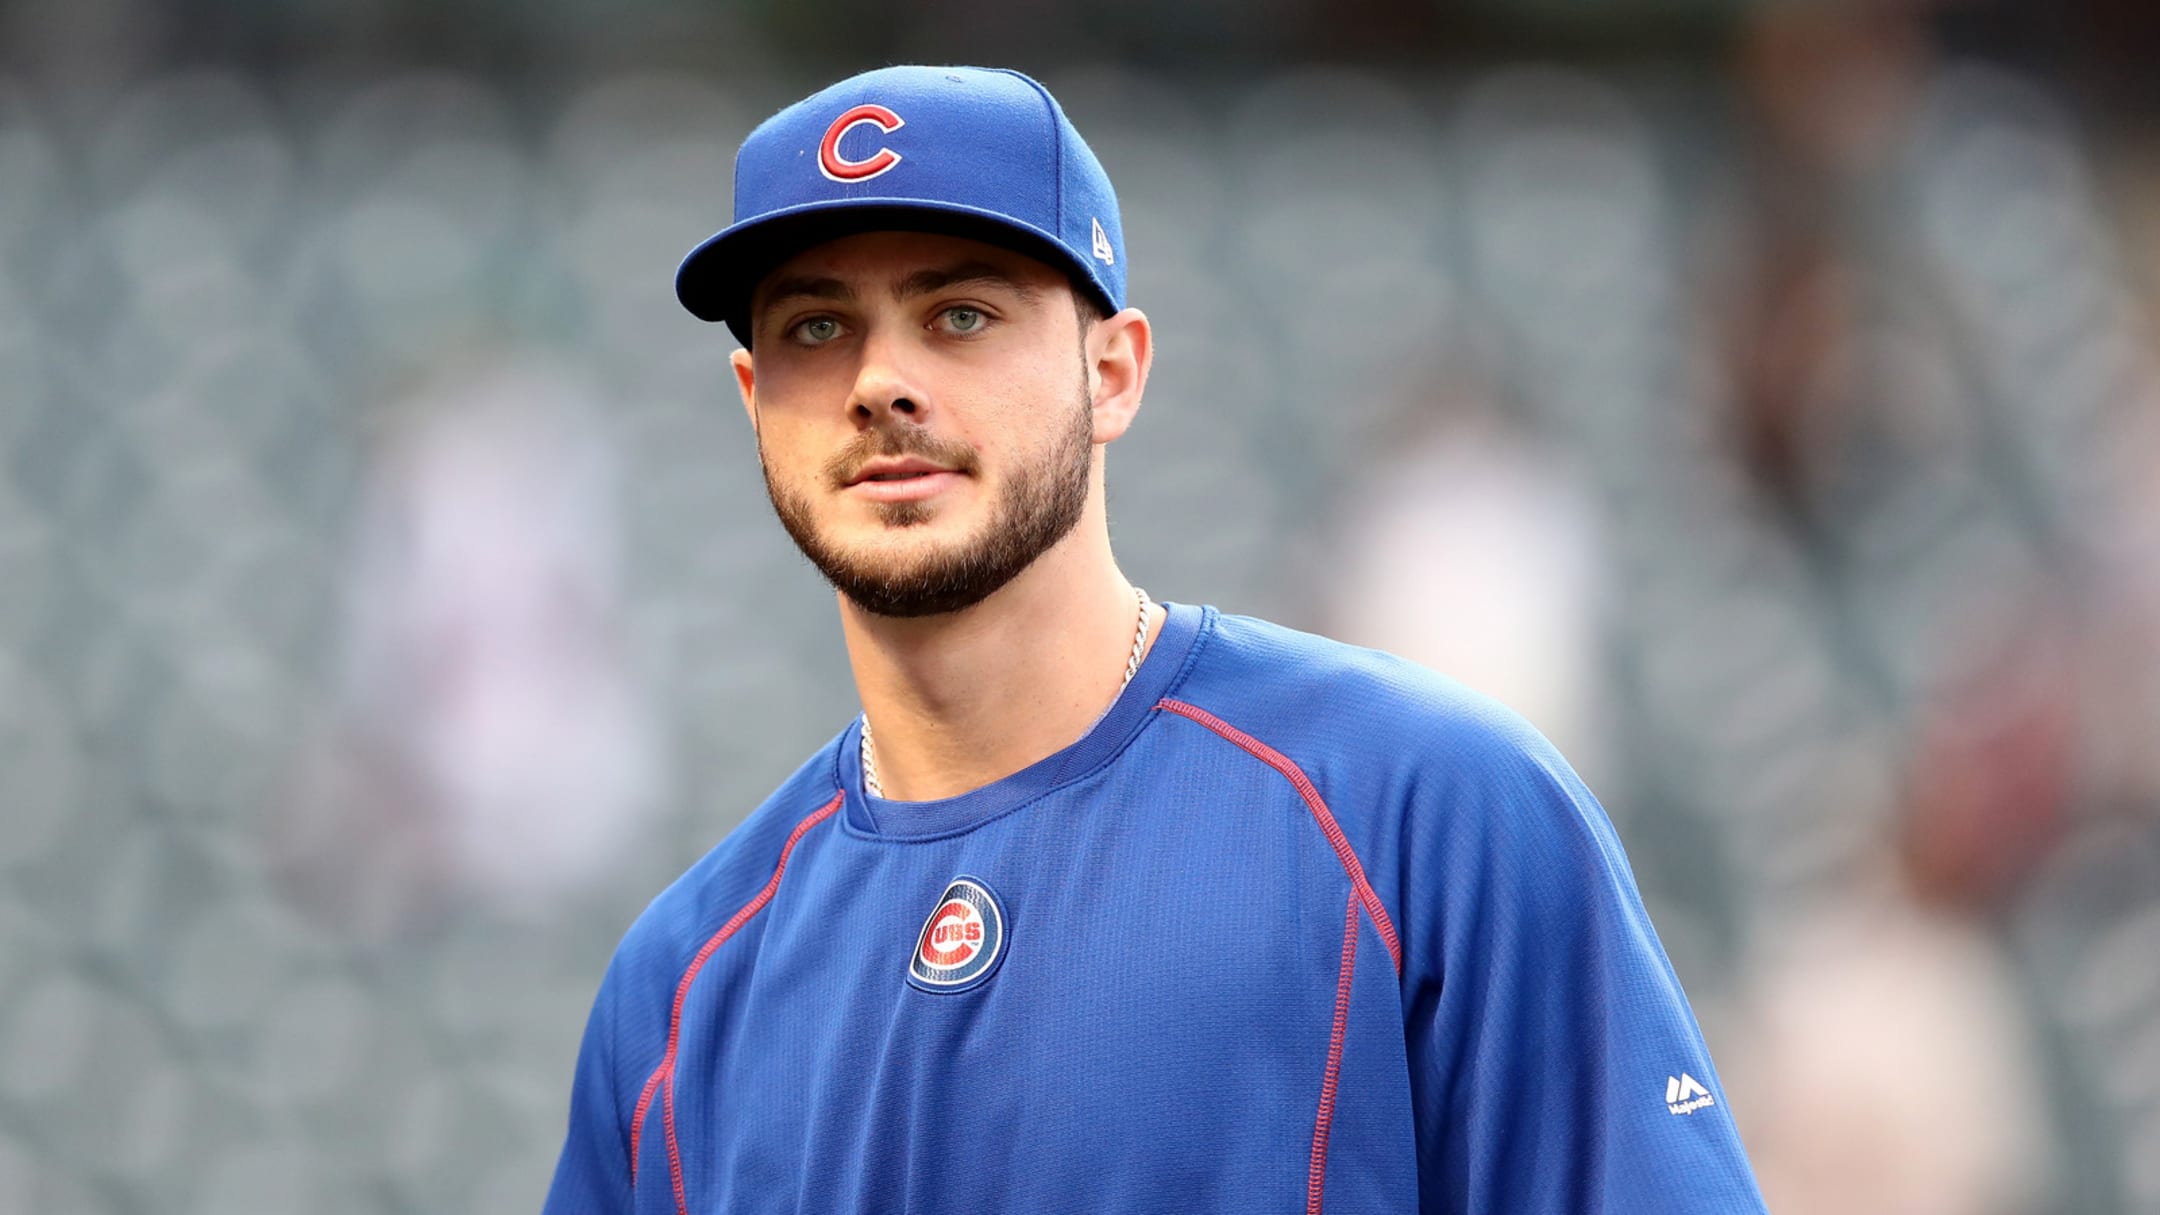 MLB Star Kris Bryant Signs With Express